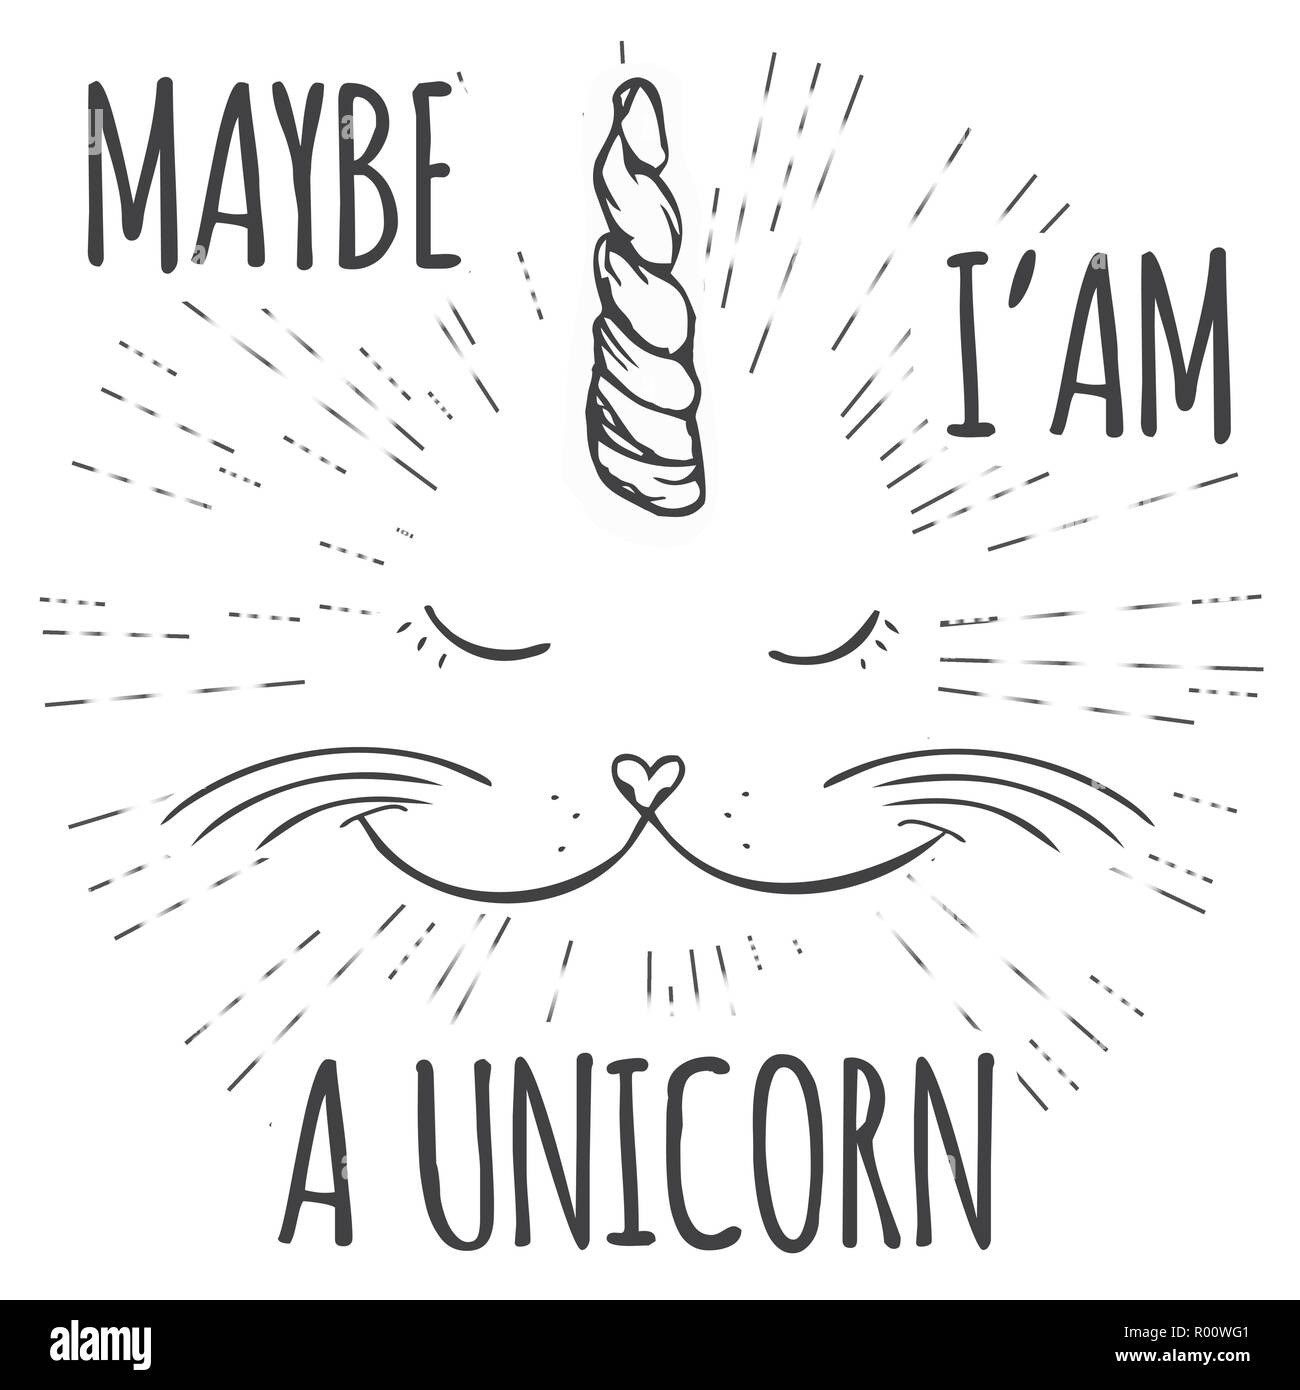 unicorn cat,Funny Hand drawn design for t-shirt or greeting card,vector illustration. Stock Vector